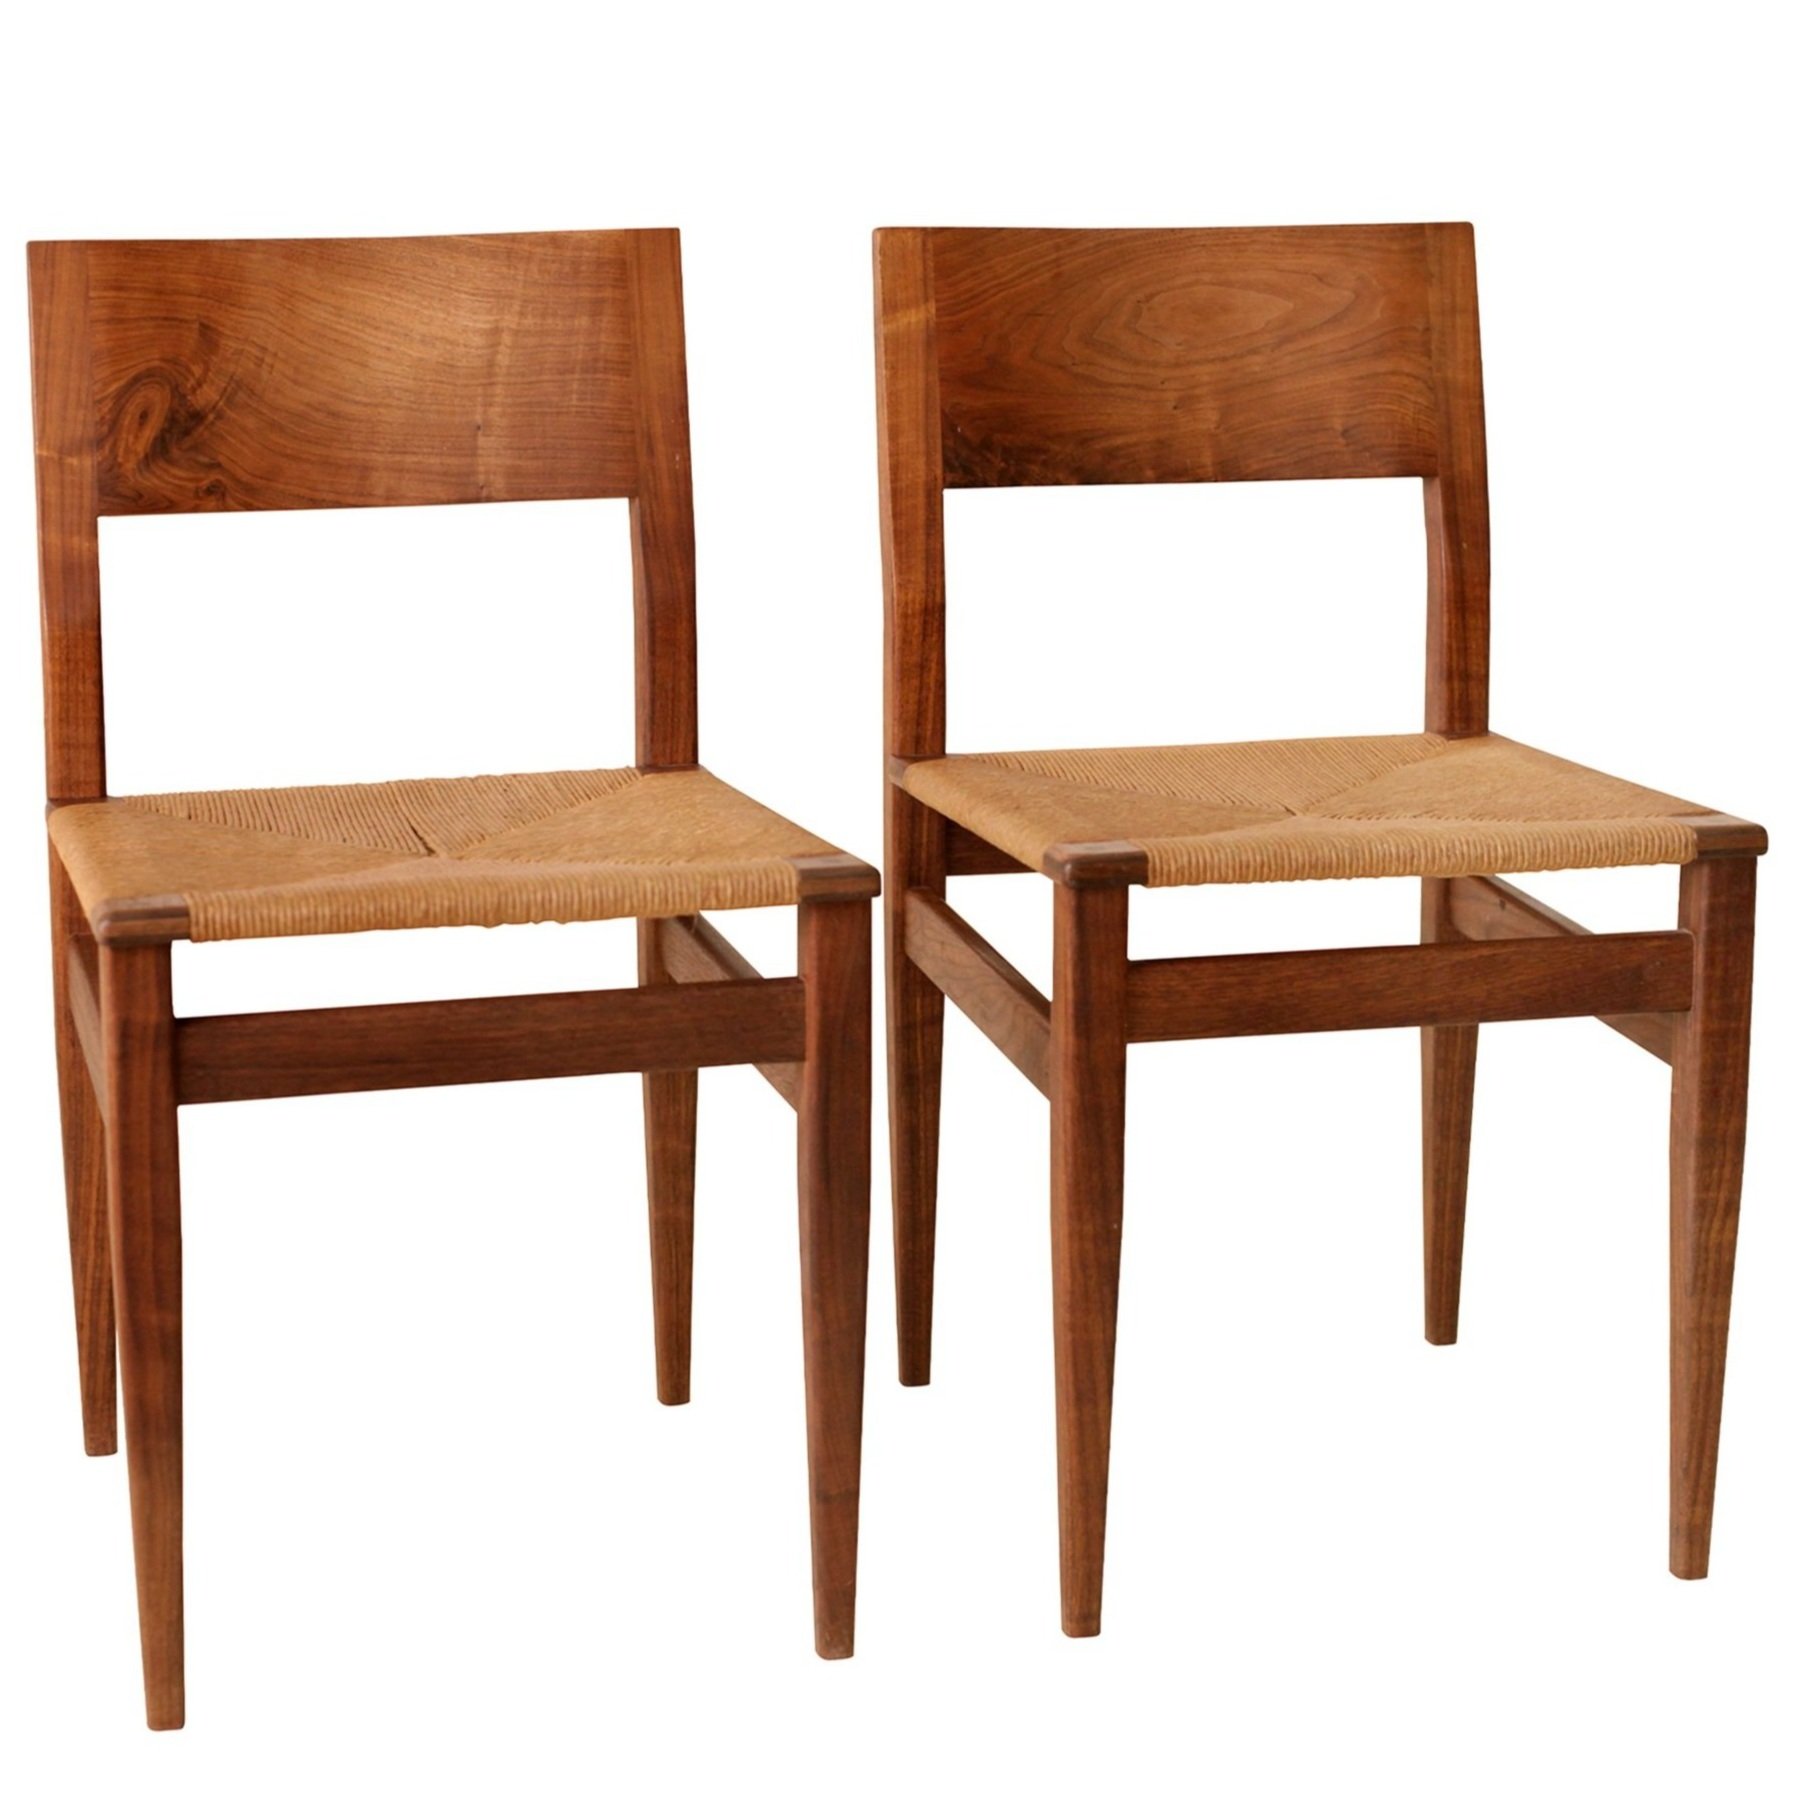 The Boyd Dining Chair